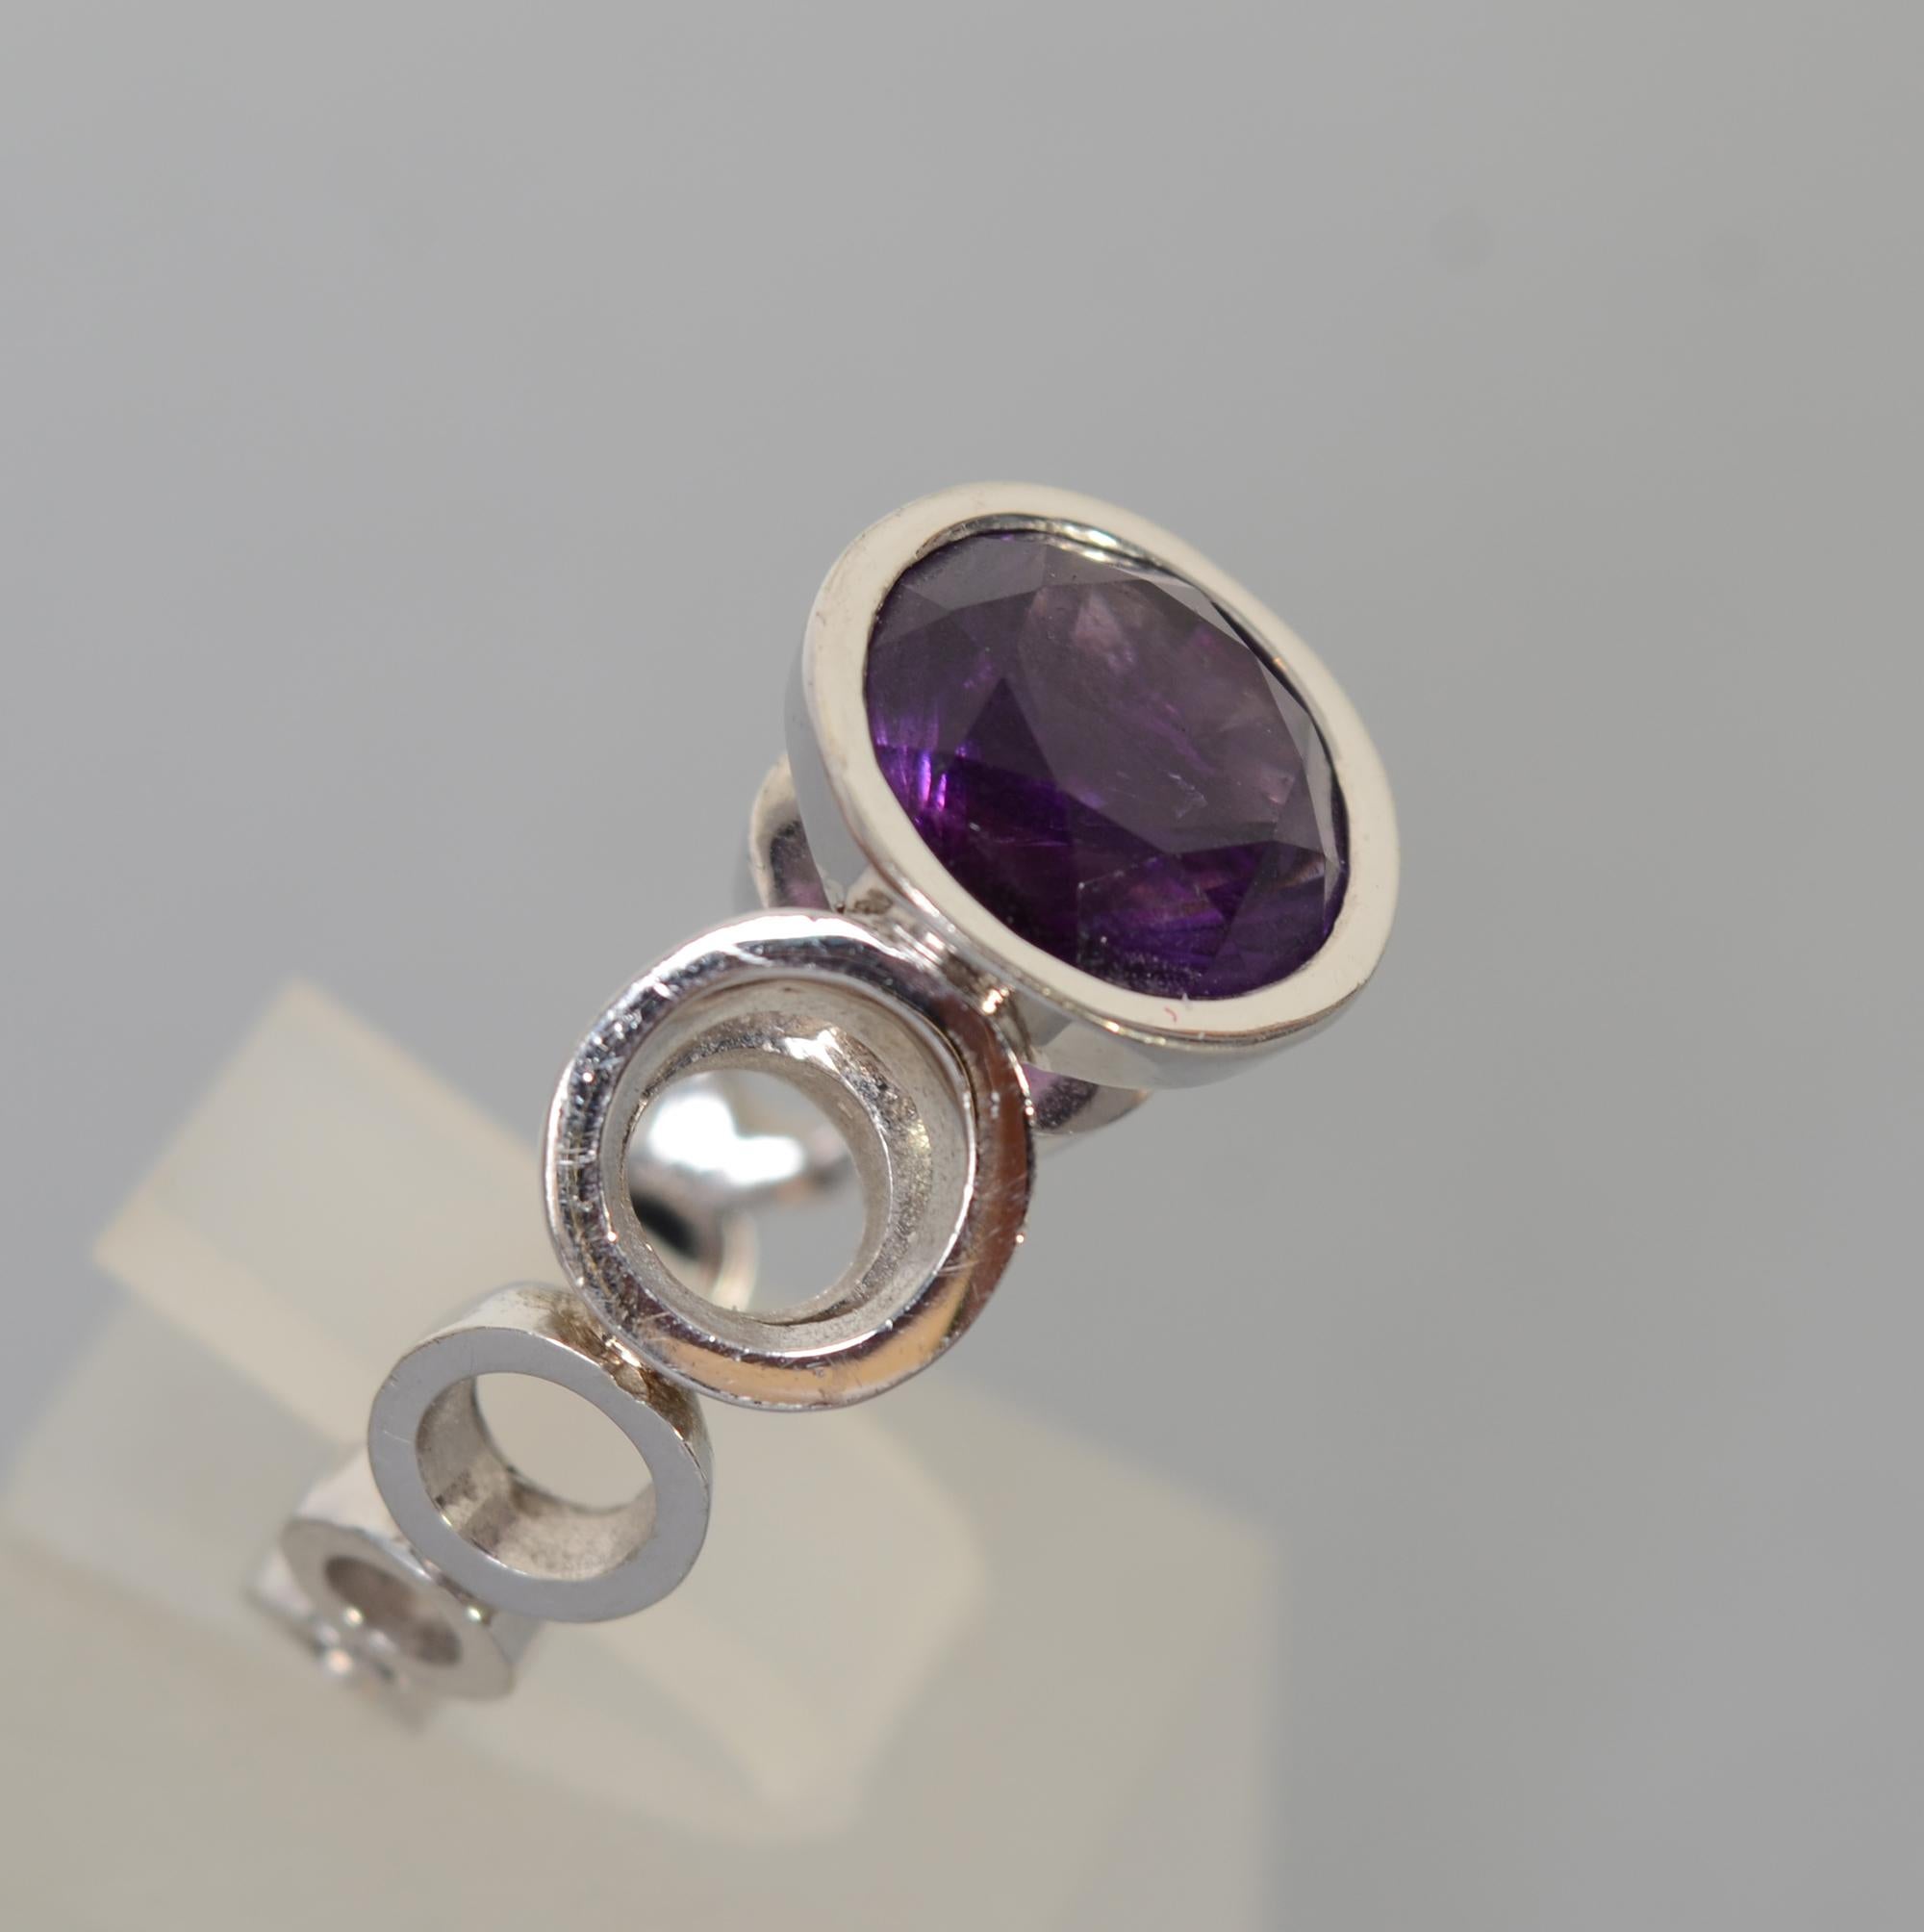 Contemporary amethyst solitaire ring by Scott Gauthier set in 14 karat white gold. The ring consists of graduated open circles with a flat shank. The circle housing the stone is cleverly set above the band to allow light to go all the way through